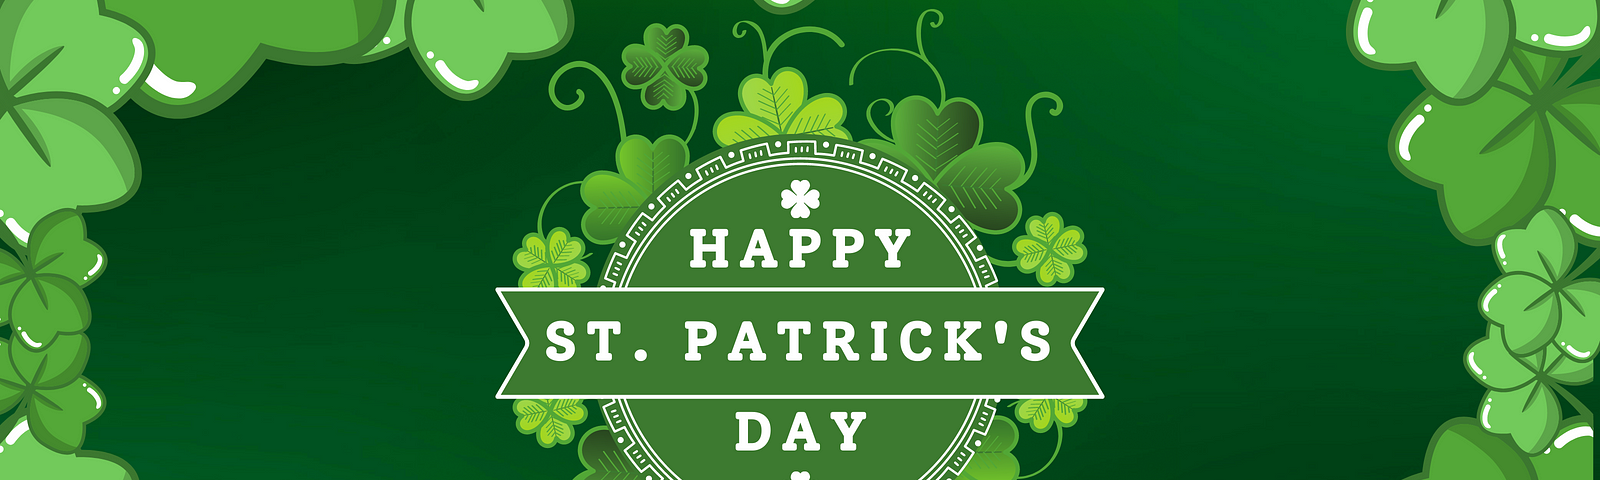 green background of shamrocks with words Happy St. Patrick’s Day